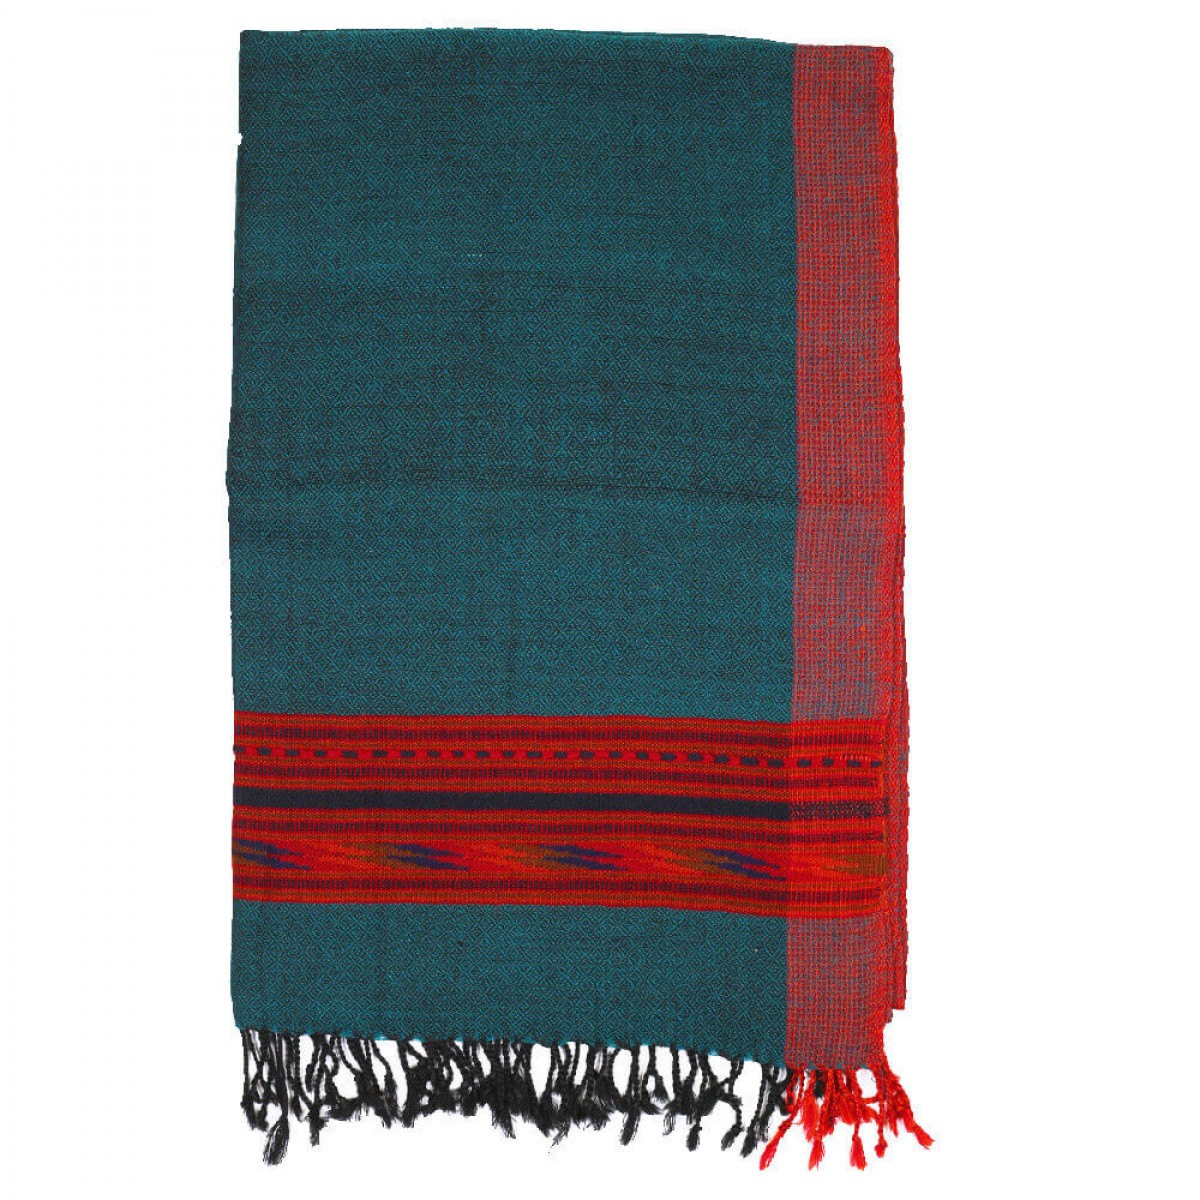 Himalayan Vibes Woolen Stole - Teal & Red